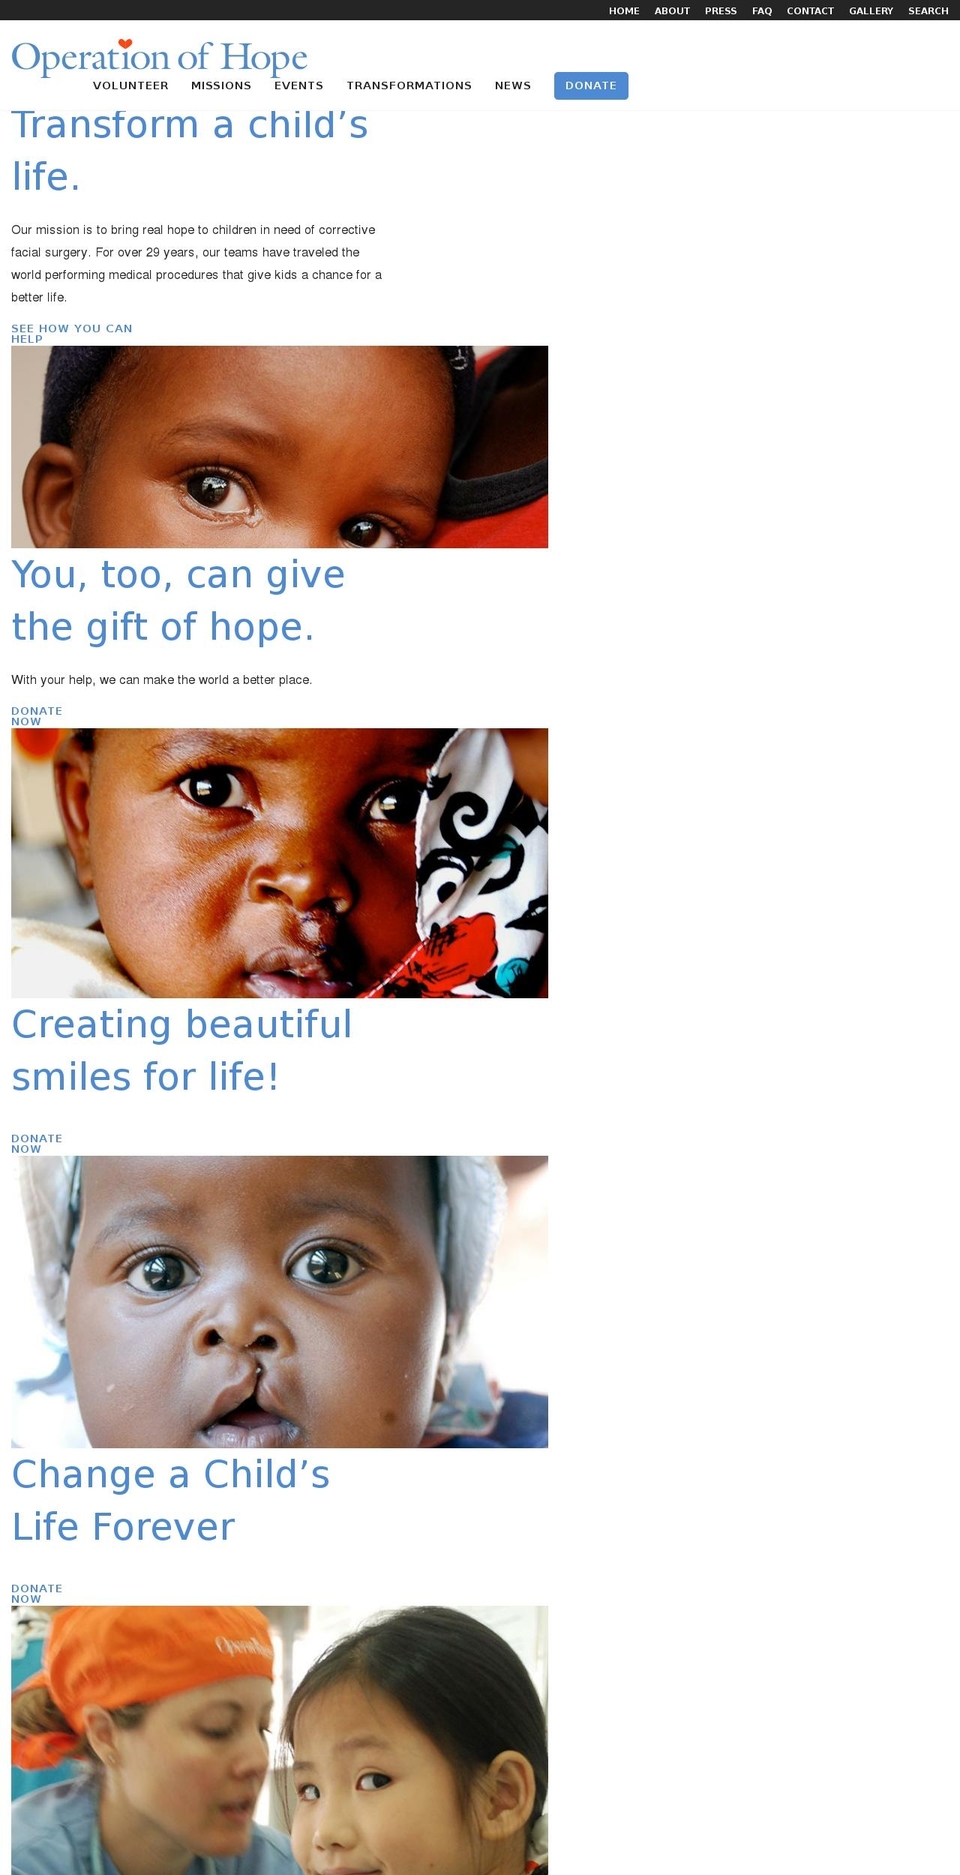 operationofhope-2-58 Shopify theme site example operationofhope.org